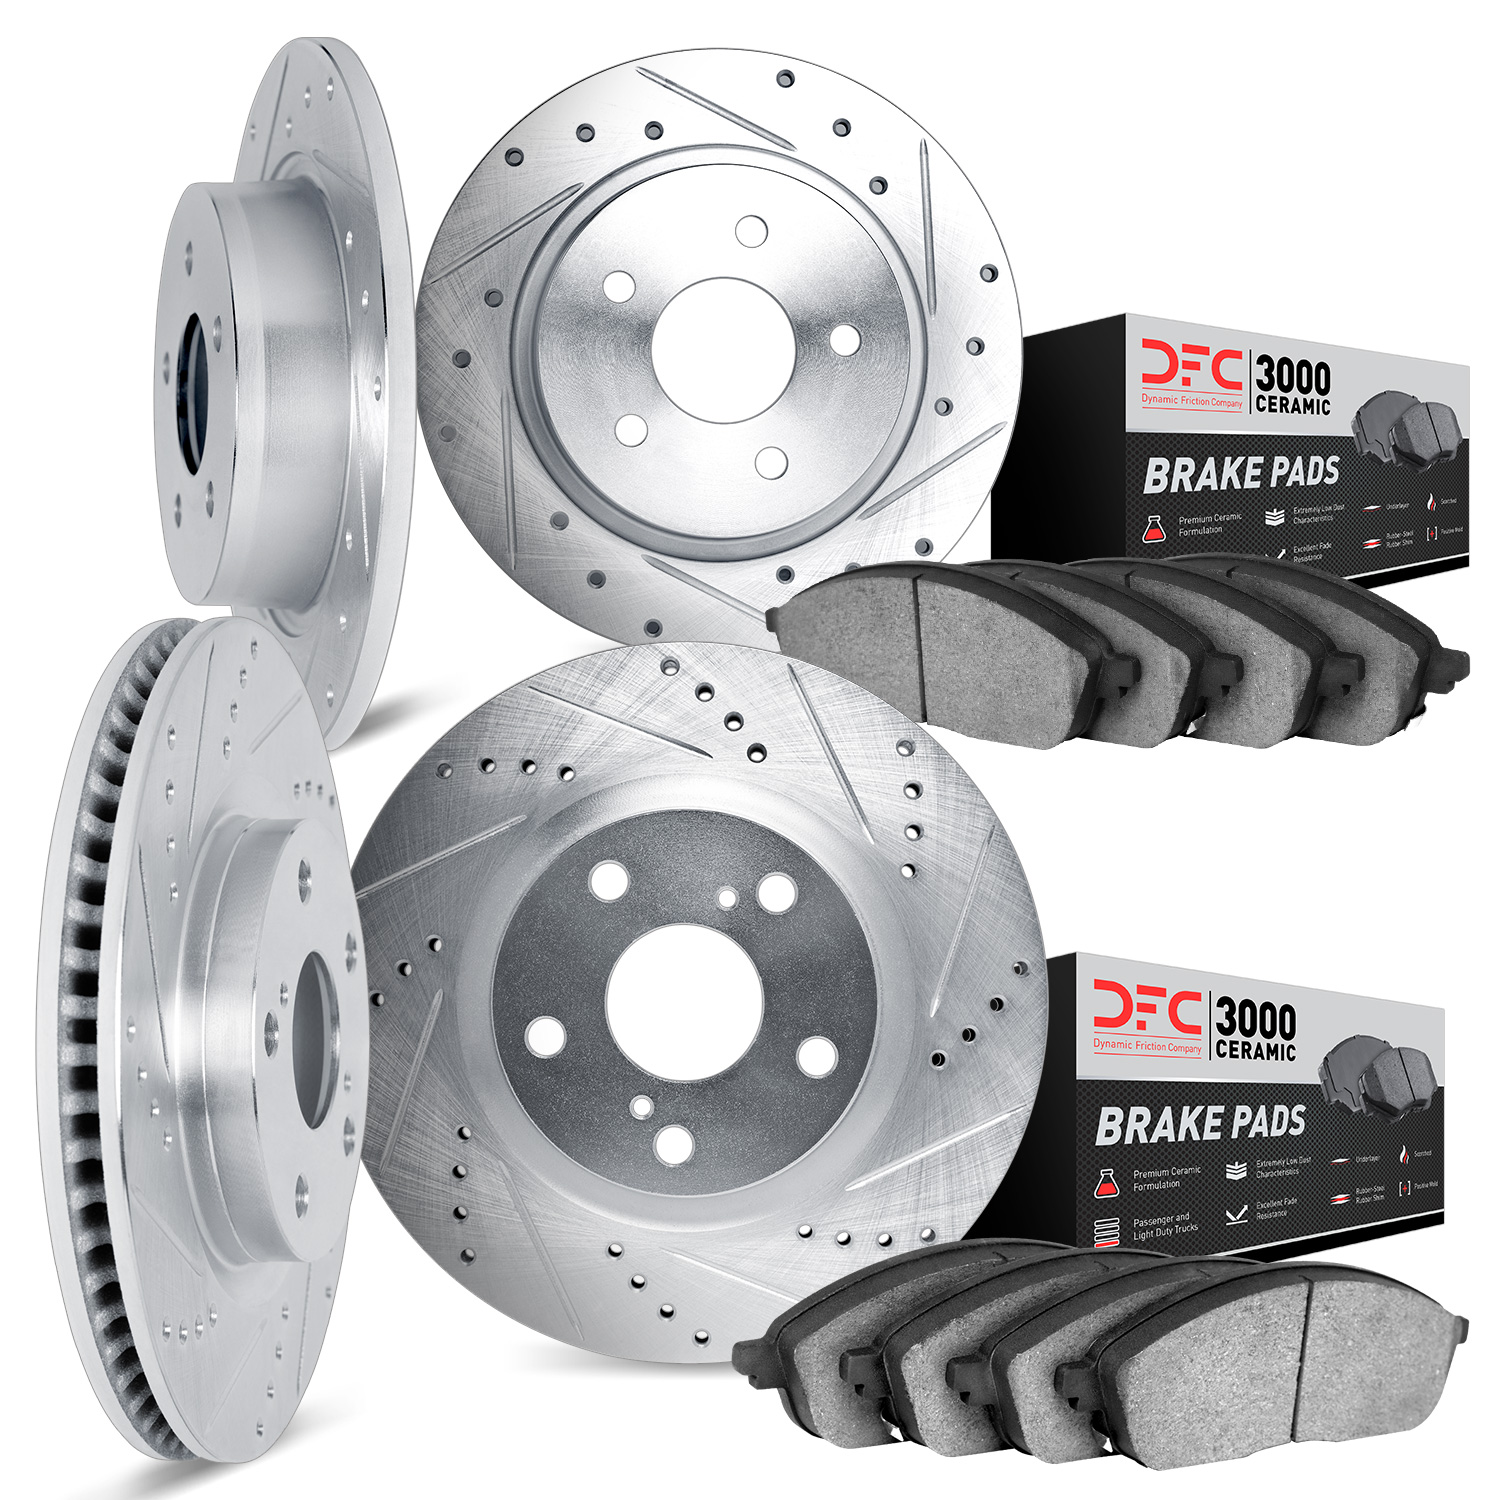 7304-74047 Drilled/Slotted Brake Rotor with 3000-Series Ceramic Brake Pads Kit [Silver], 2009-2018 Audi/Volkswagen, Position: Fr